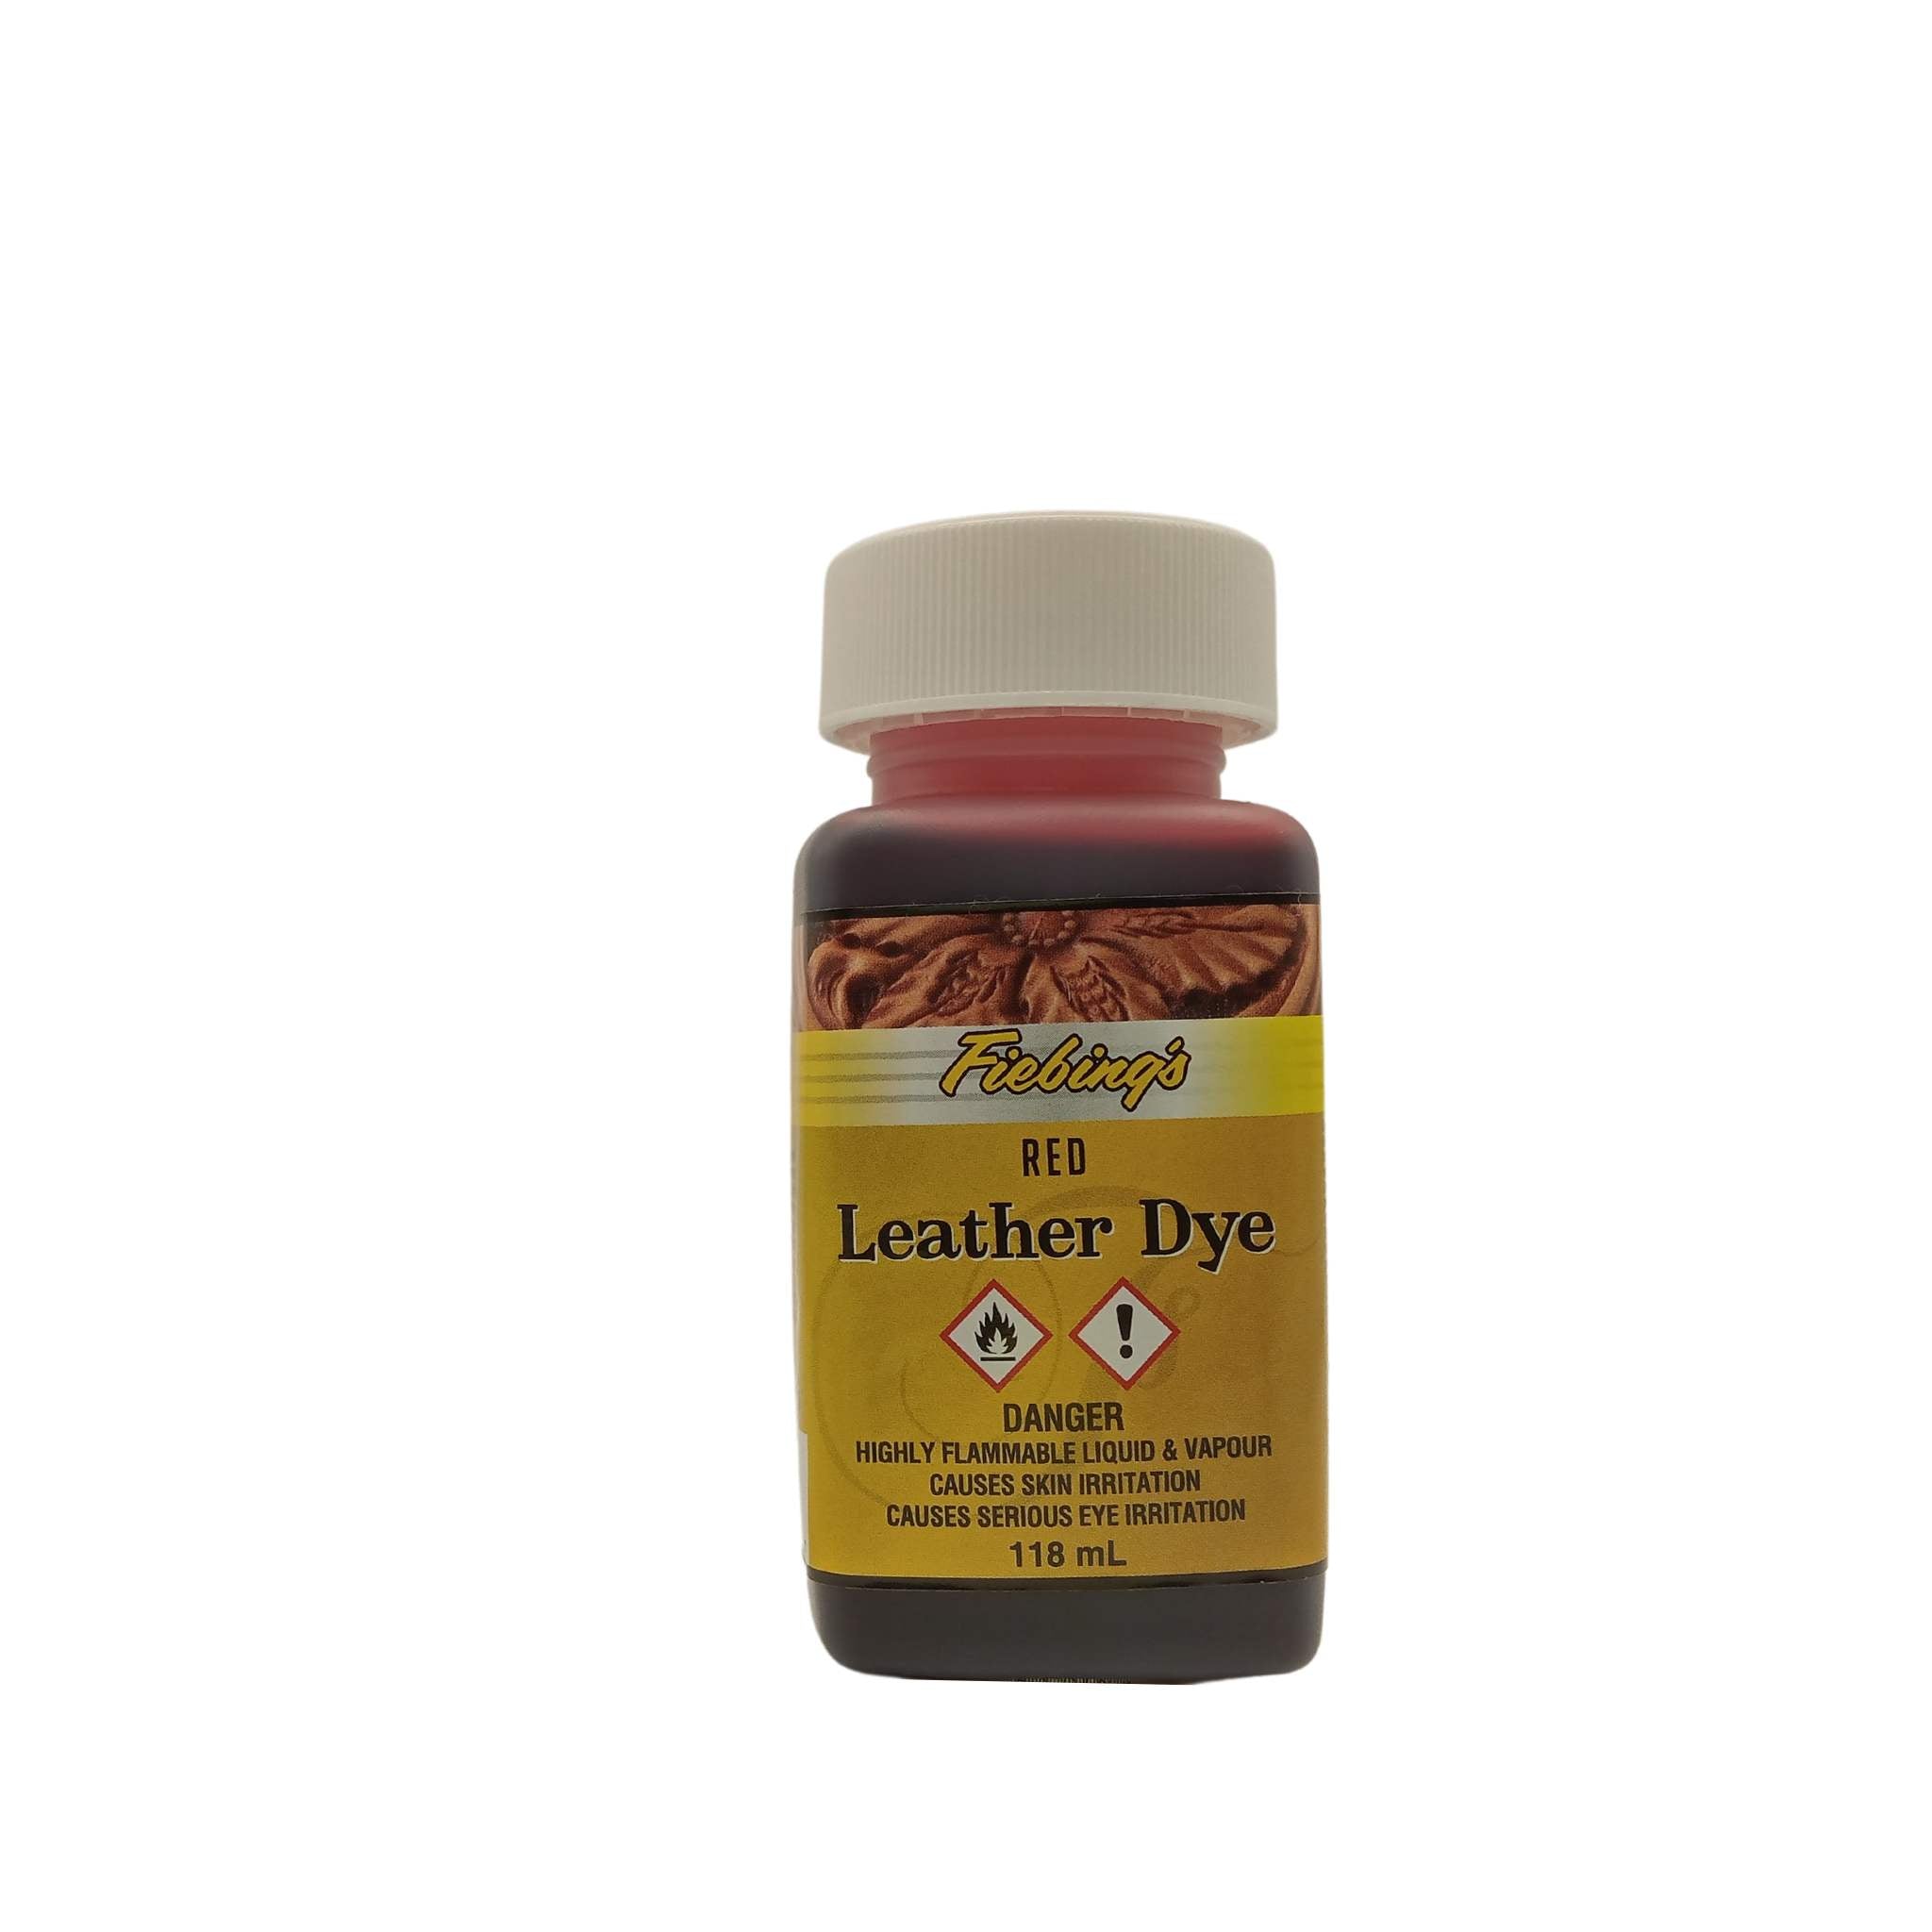 Dye your leathercraft projects with this Fiebing's solvent based leather dye - Red